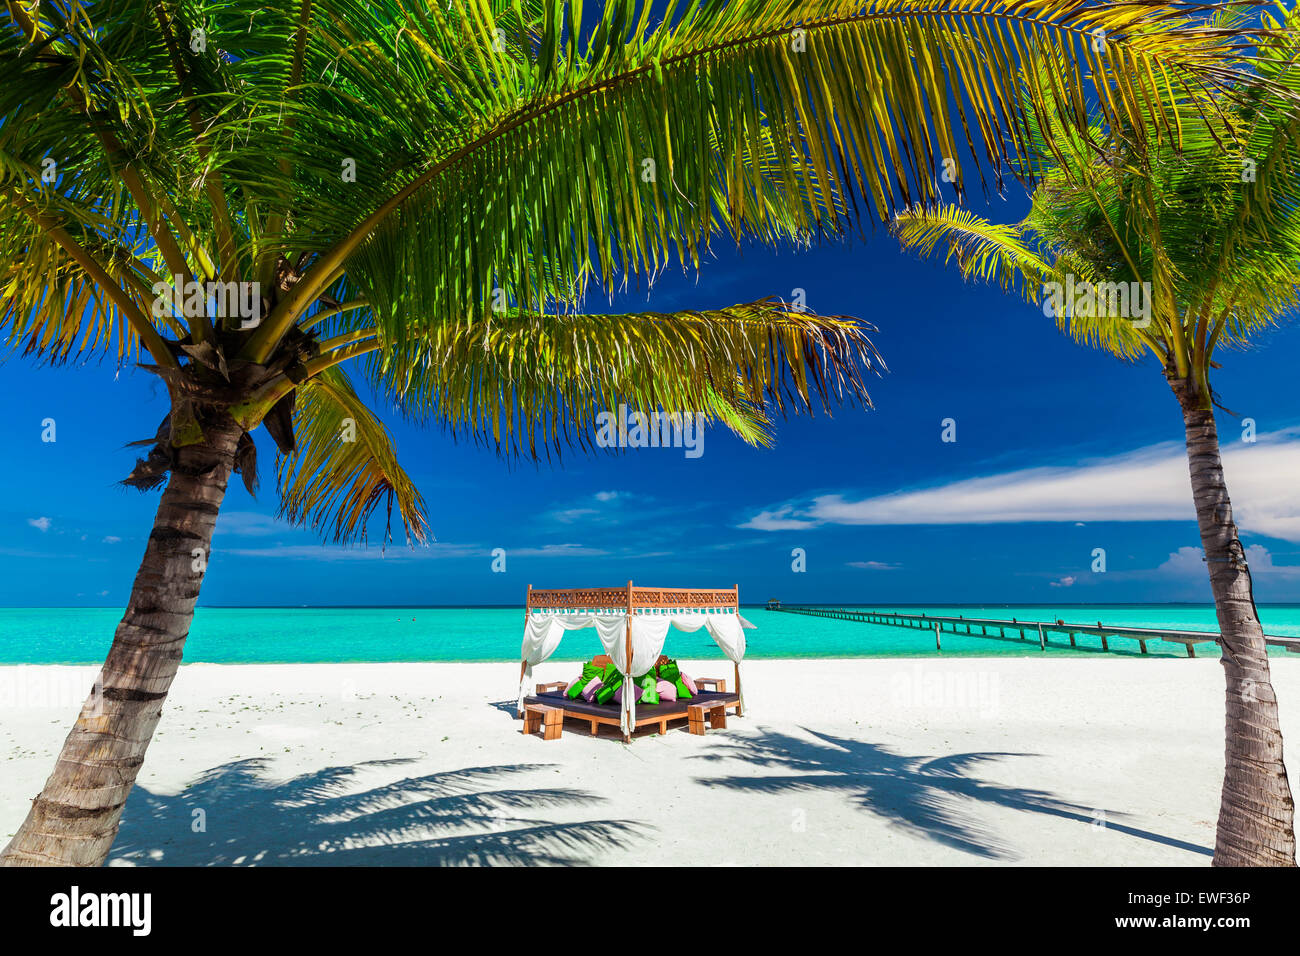 Tropical white beach, beautiful blue sky, palm trees and place to relax Stock Photo